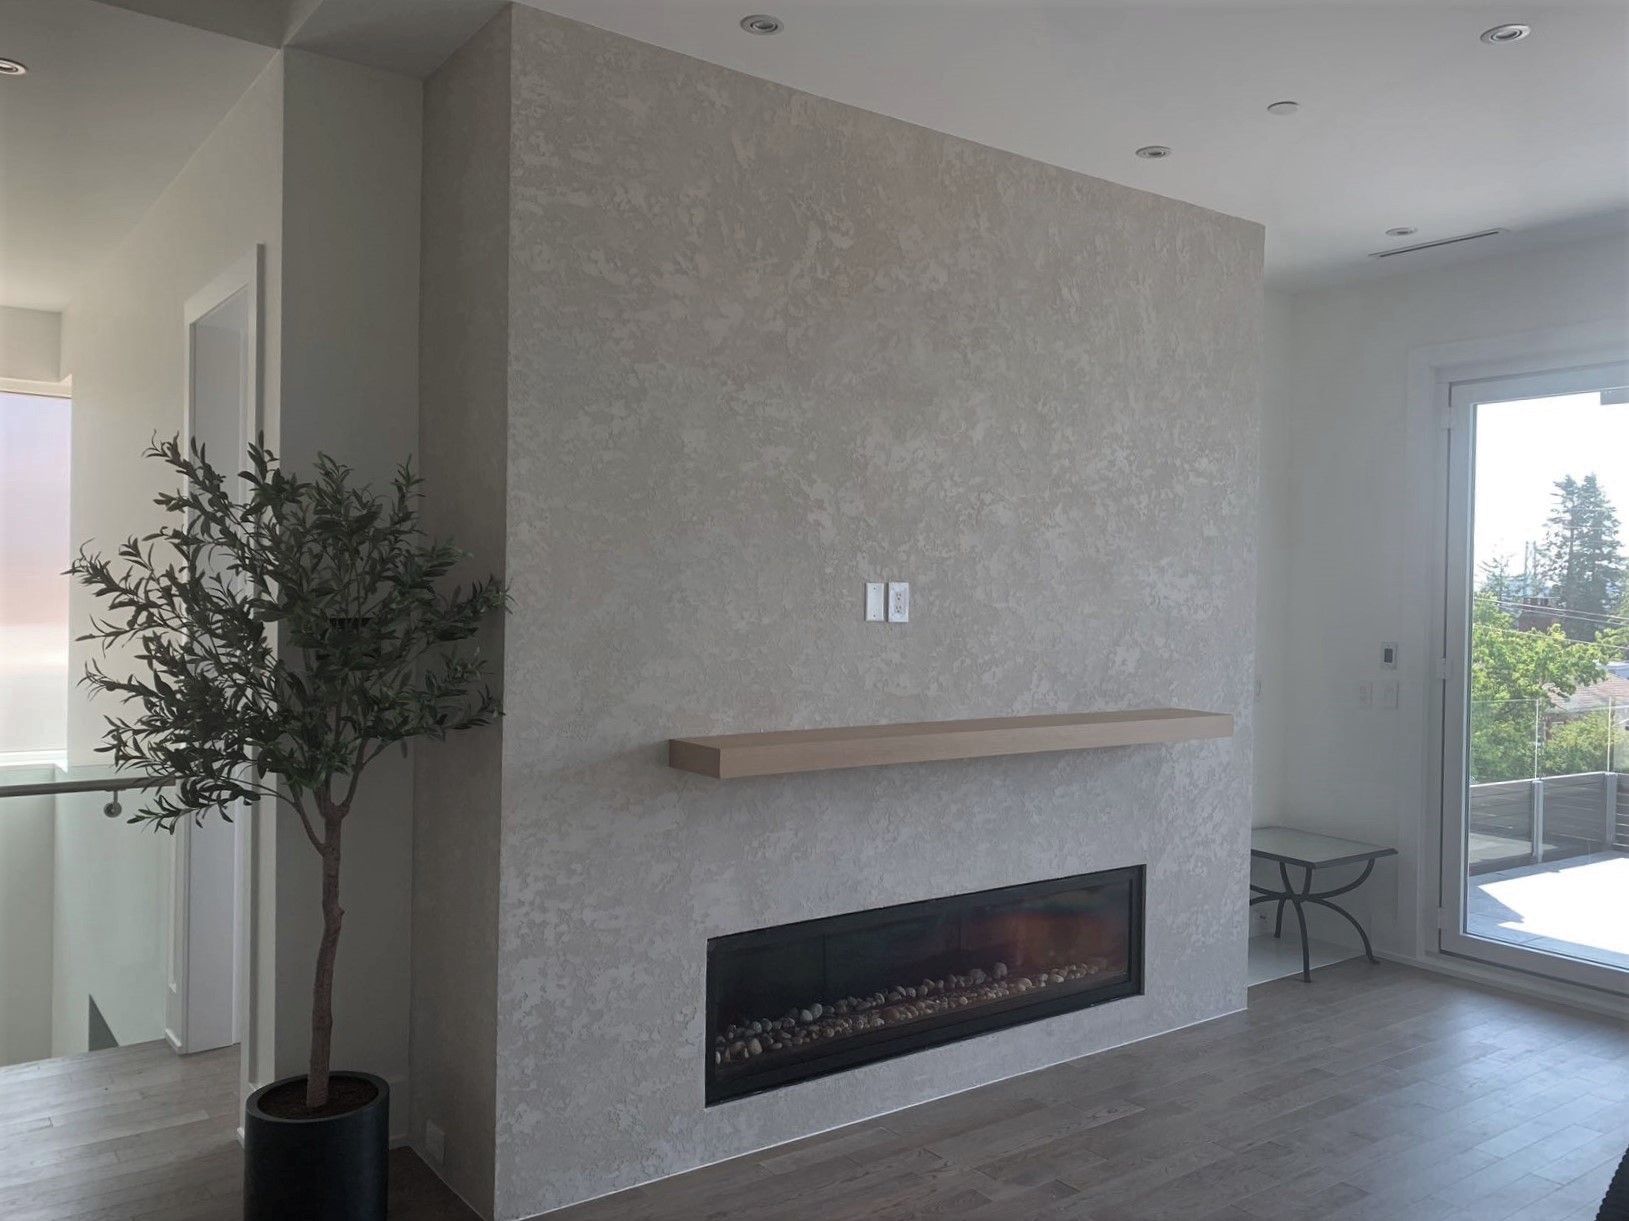 West Vancouver Residential House Renovation Fireplace